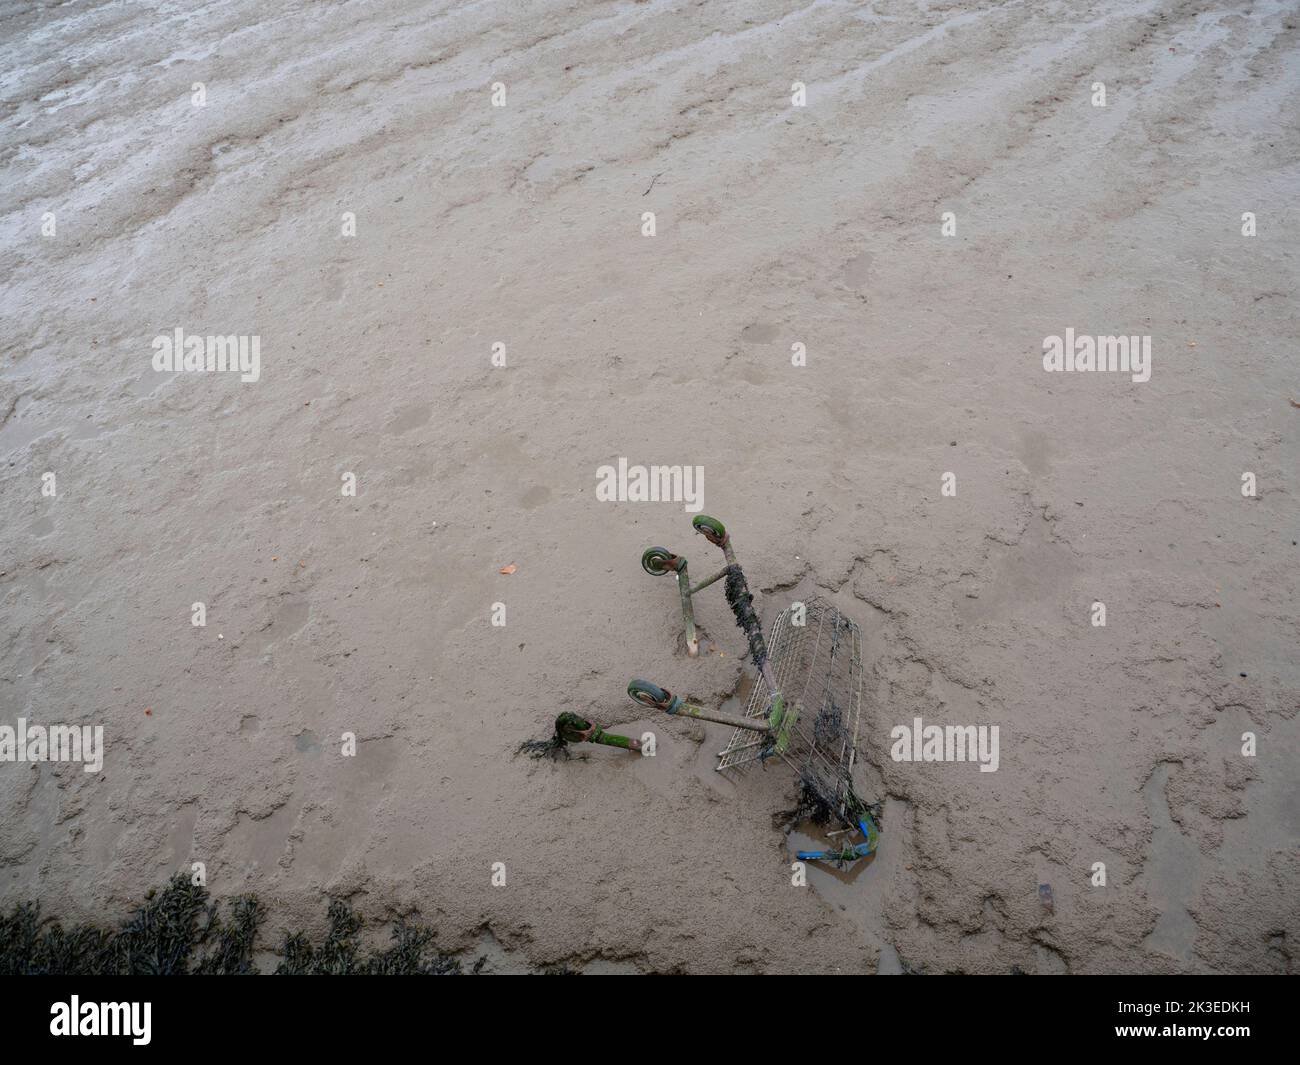 Gravesend Kent UK Discarded shopping trolley submerged in mud in the River Thames at Gravesend, covered with weeds and moss Stock Photo